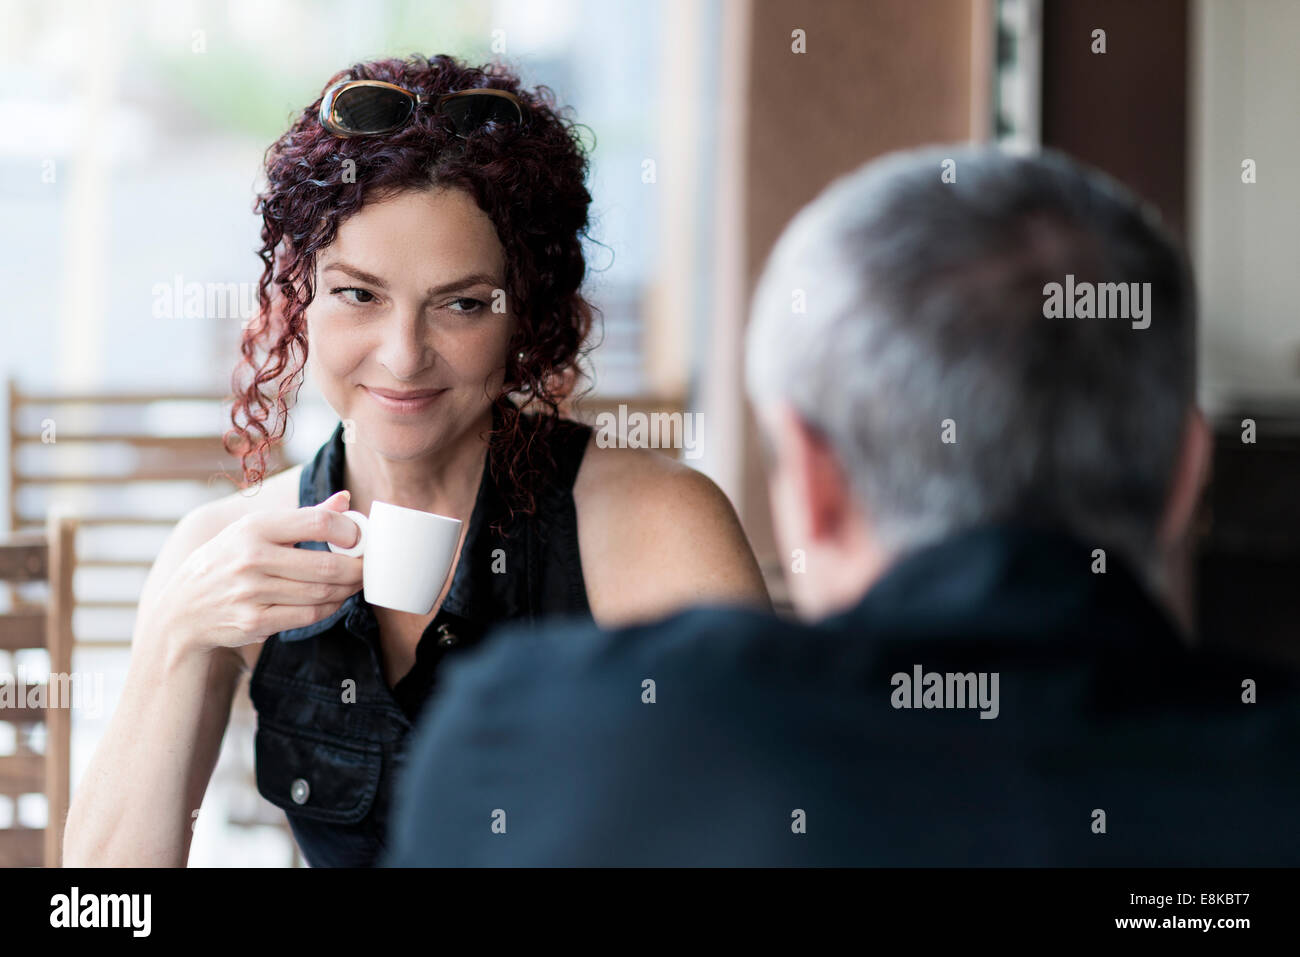 Mildlife dating-older ouple in a coffee shop Stock Photo